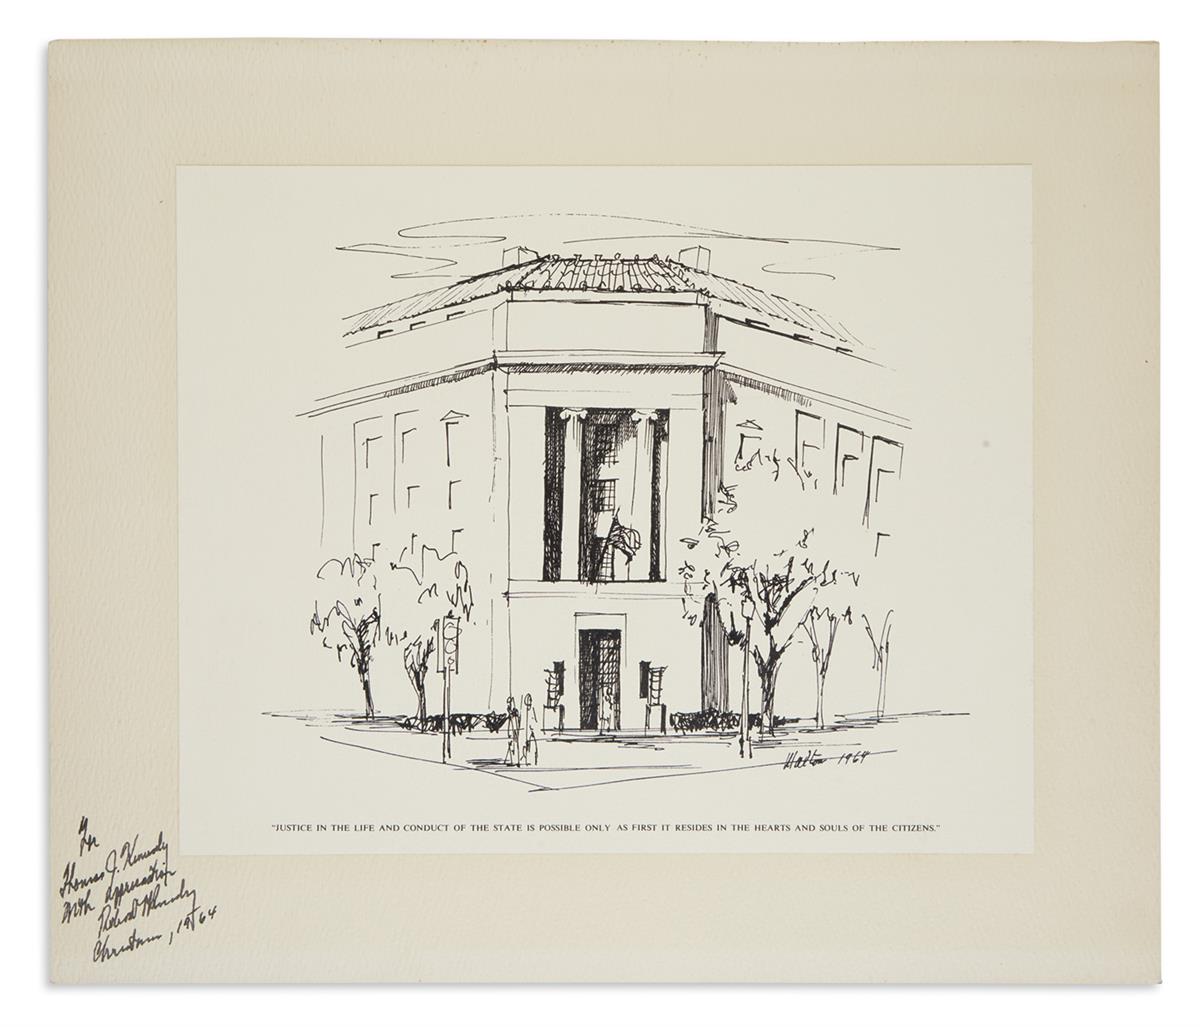 ROBERT F. KENNEDY. Print Signed and Inscribed, to Thomas J. Kenney, reproduction of a drawing by Walton showing the Depa...